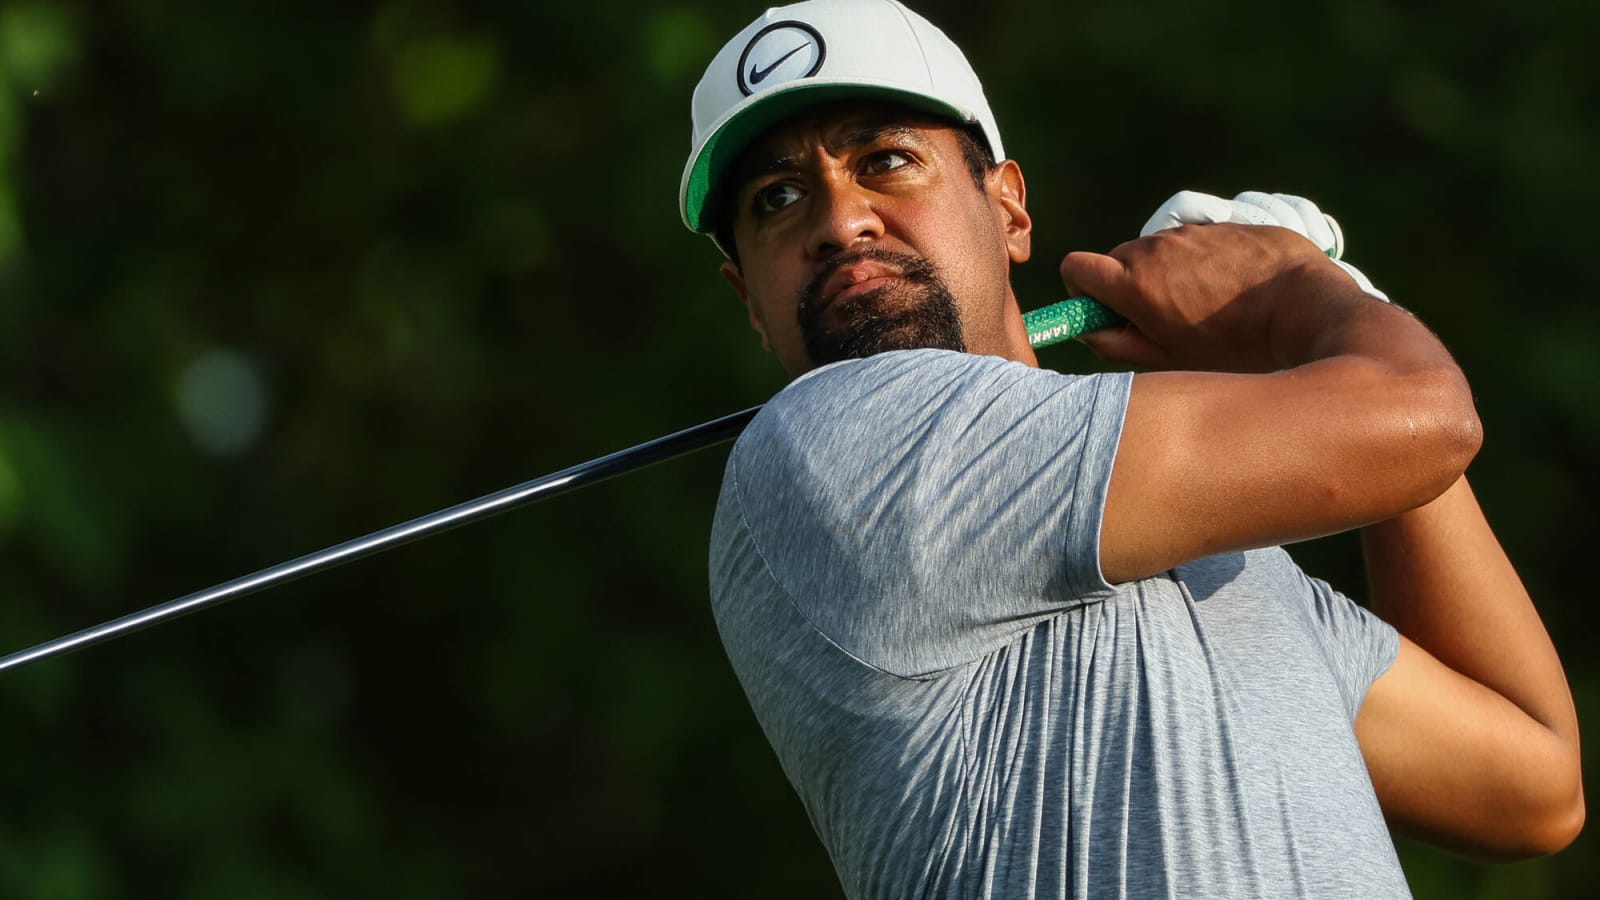 Golf best bets: 3 outright bets to target for the BMW Championship